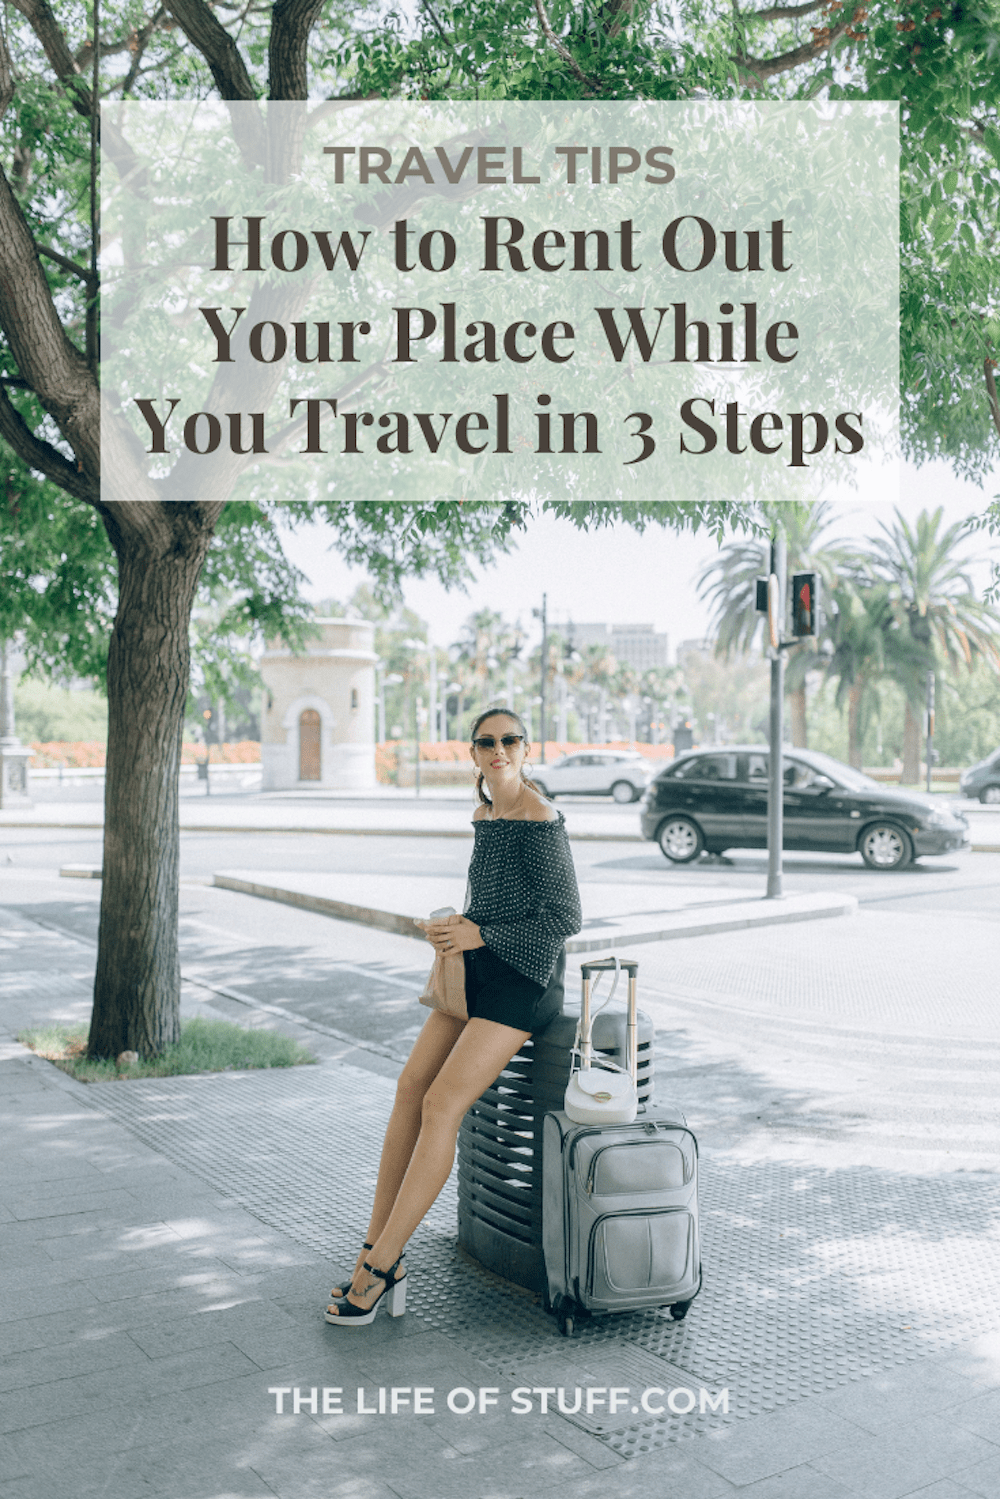 How to Rent Out Your Place While You Travel in 3 Steps - The Life of Stuff